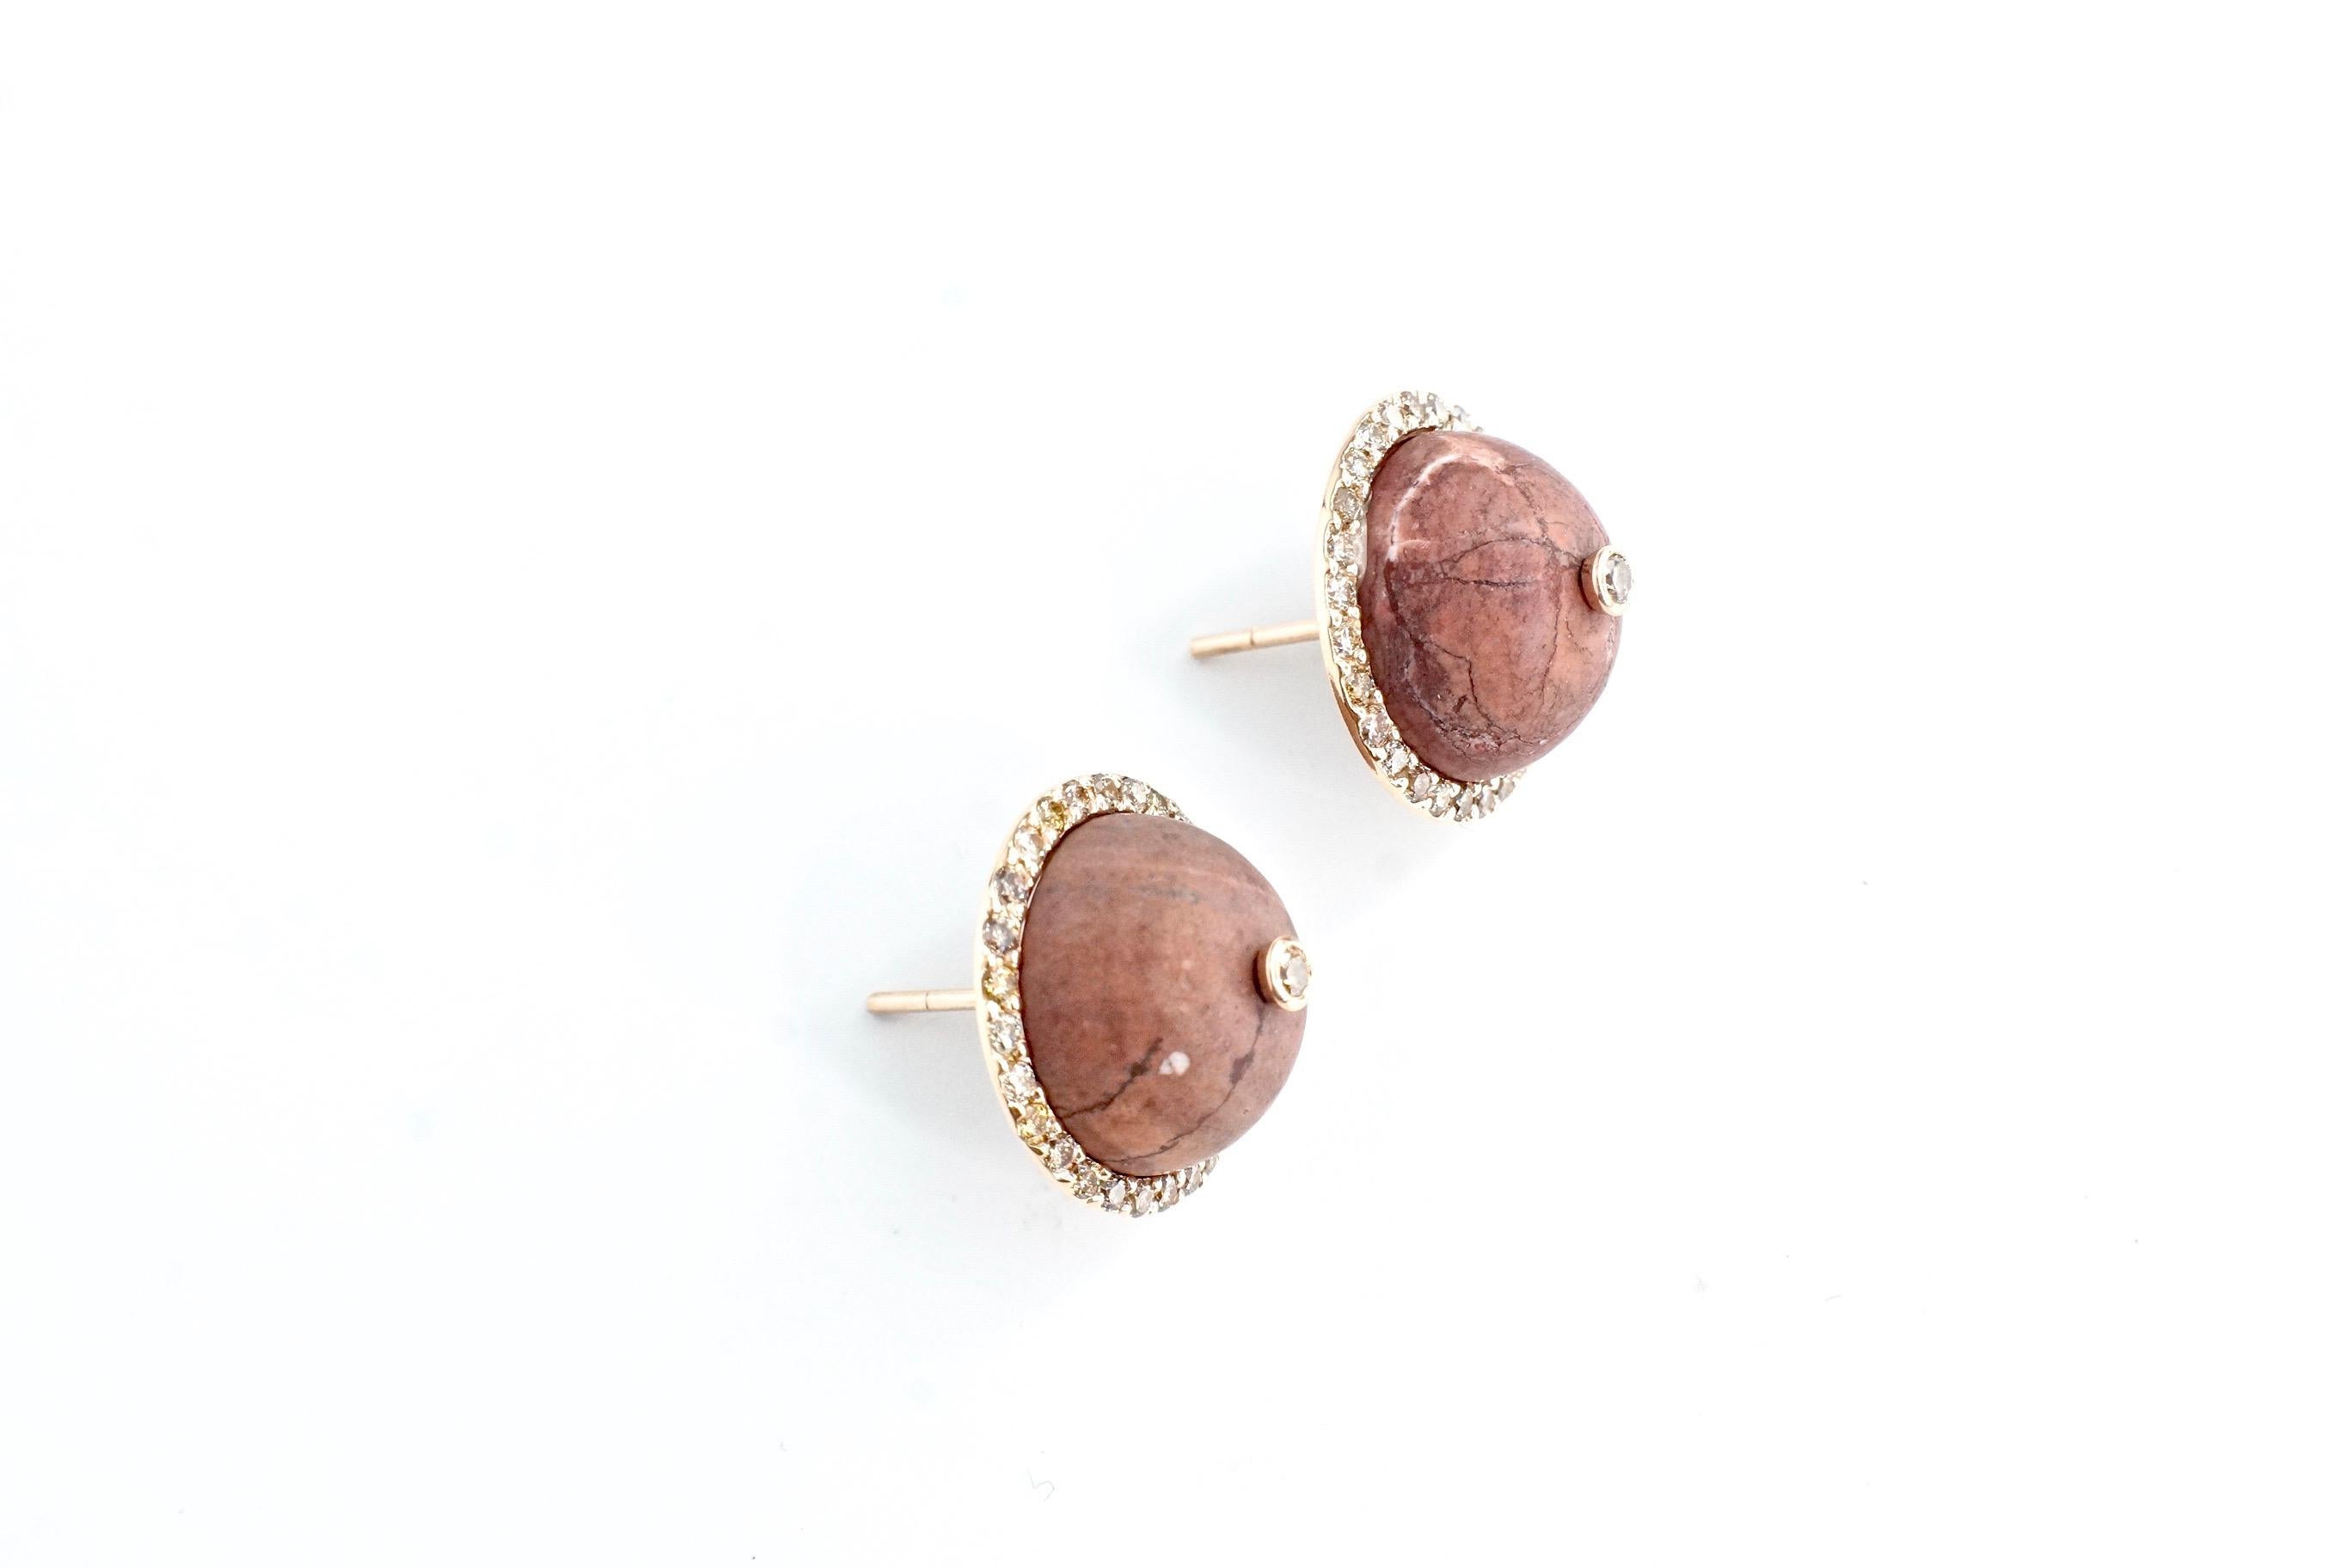 Brown Jasper Martha Studs
A pair of eighteen-karat rose gold earrings consisting of a dome-like brown jasper cabochon surrounded by faceted brown diamonds.  An additional brown diamond is set in the center of the jasper.  
Total Jasper Weight –